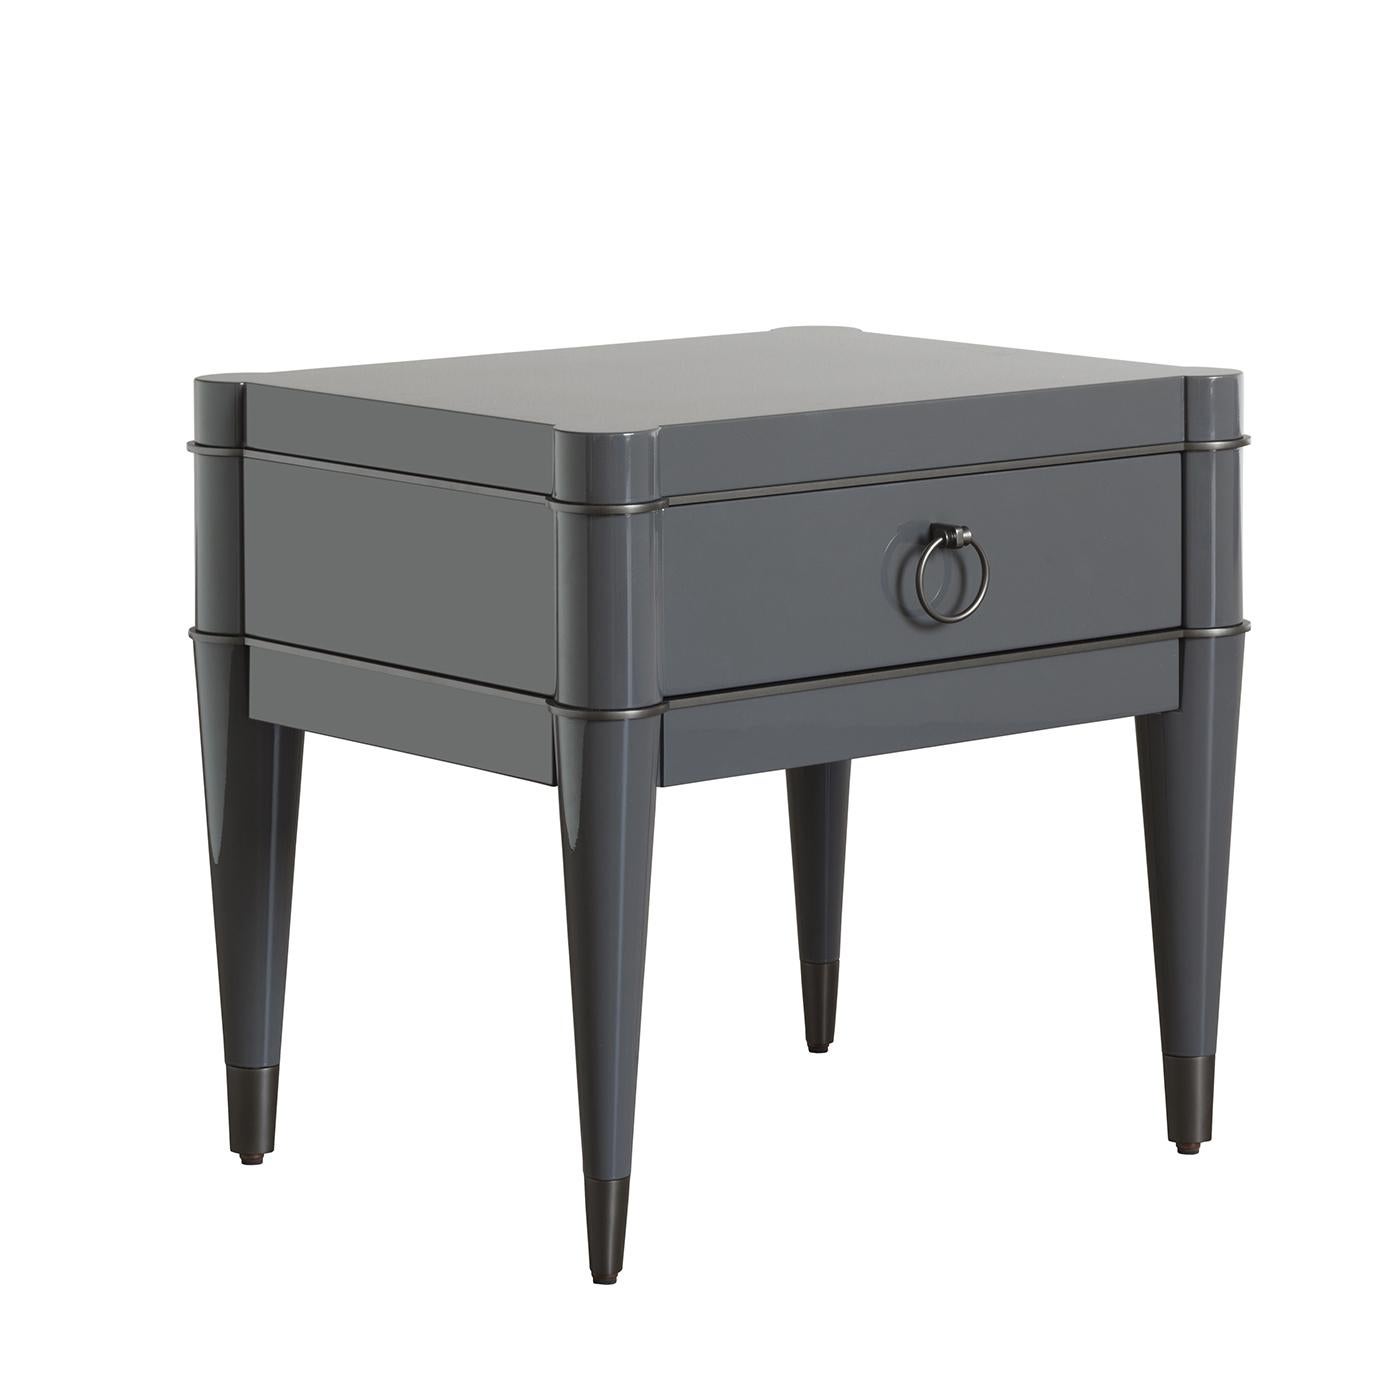 A charming addition to a bed frame, this nightstand is an exquisite presence in a classic home, thanks to its expert craftsmanship, high quality materials, and stunning details. The solid wood structure of this piece is adorned at the feet, around